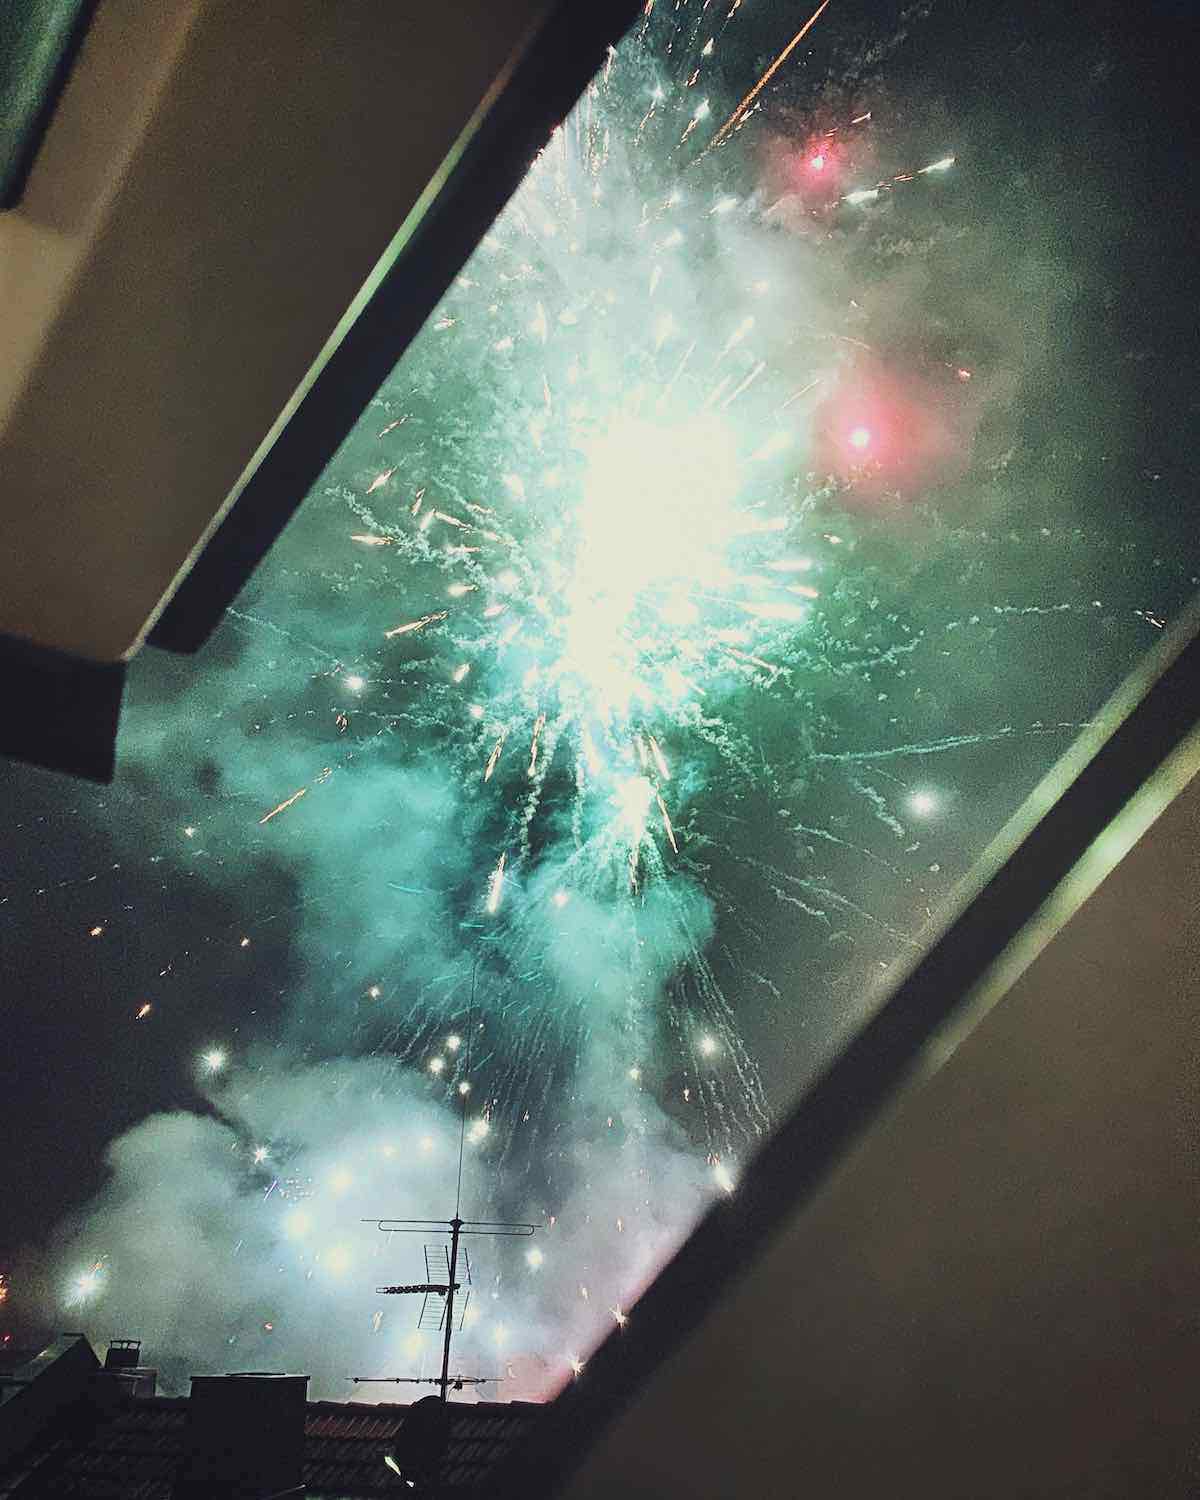 Exploding fireworks through a half opened window